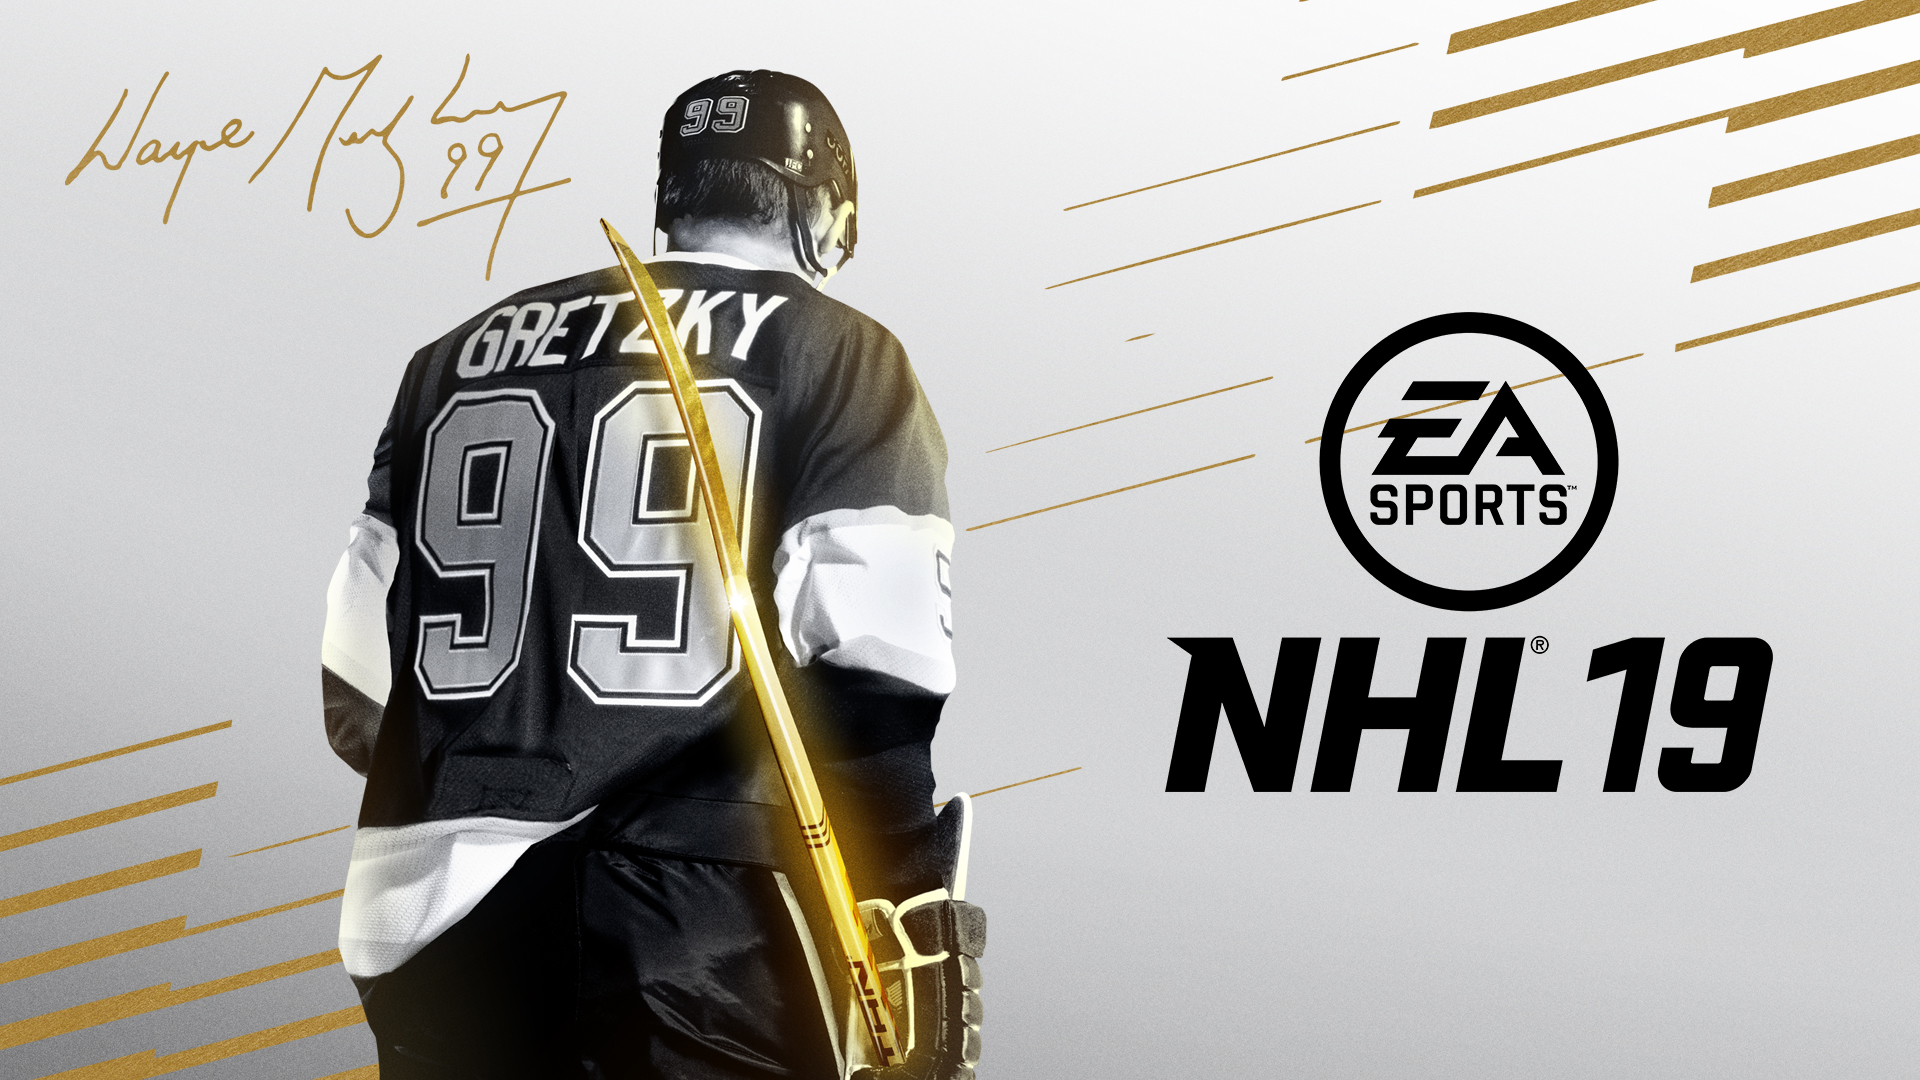 NHL 20's Finland Cover Star Is Patrik Laine